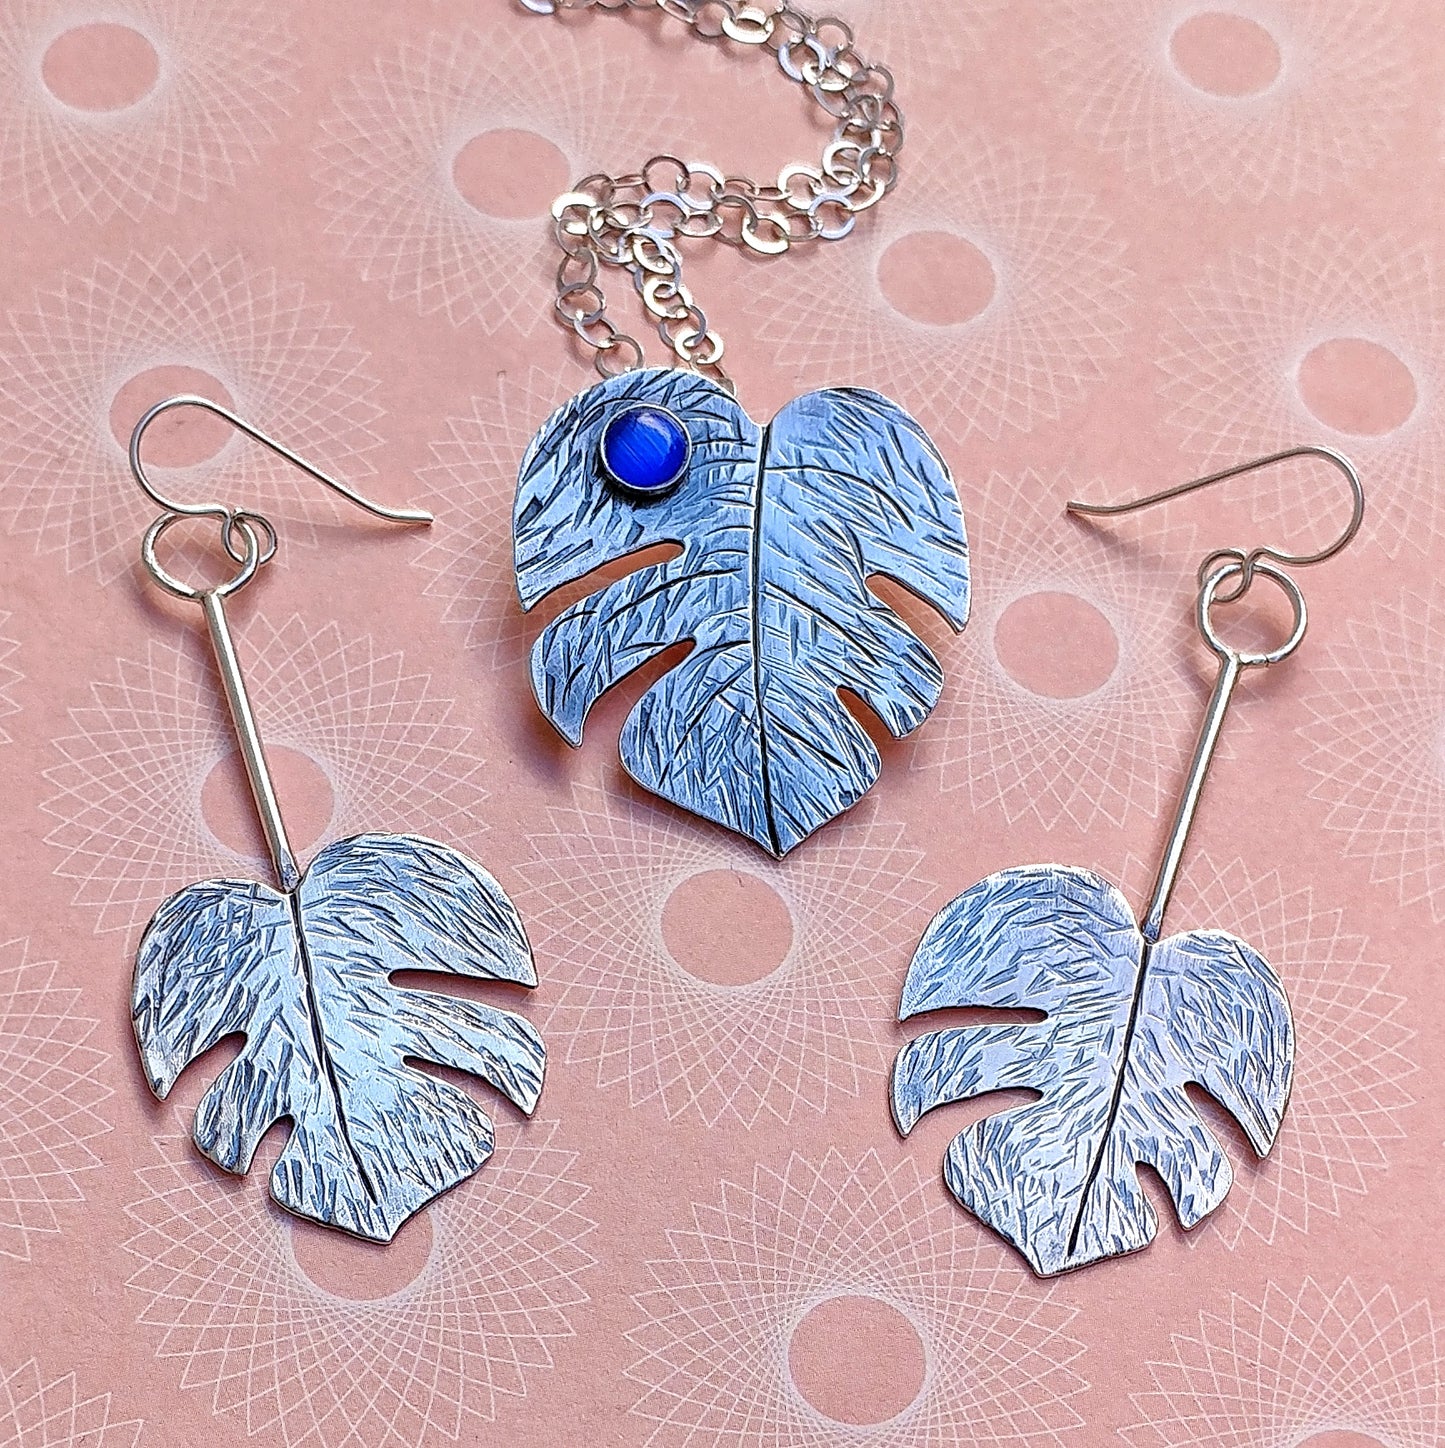 Monstera leaf necklace and earrings options